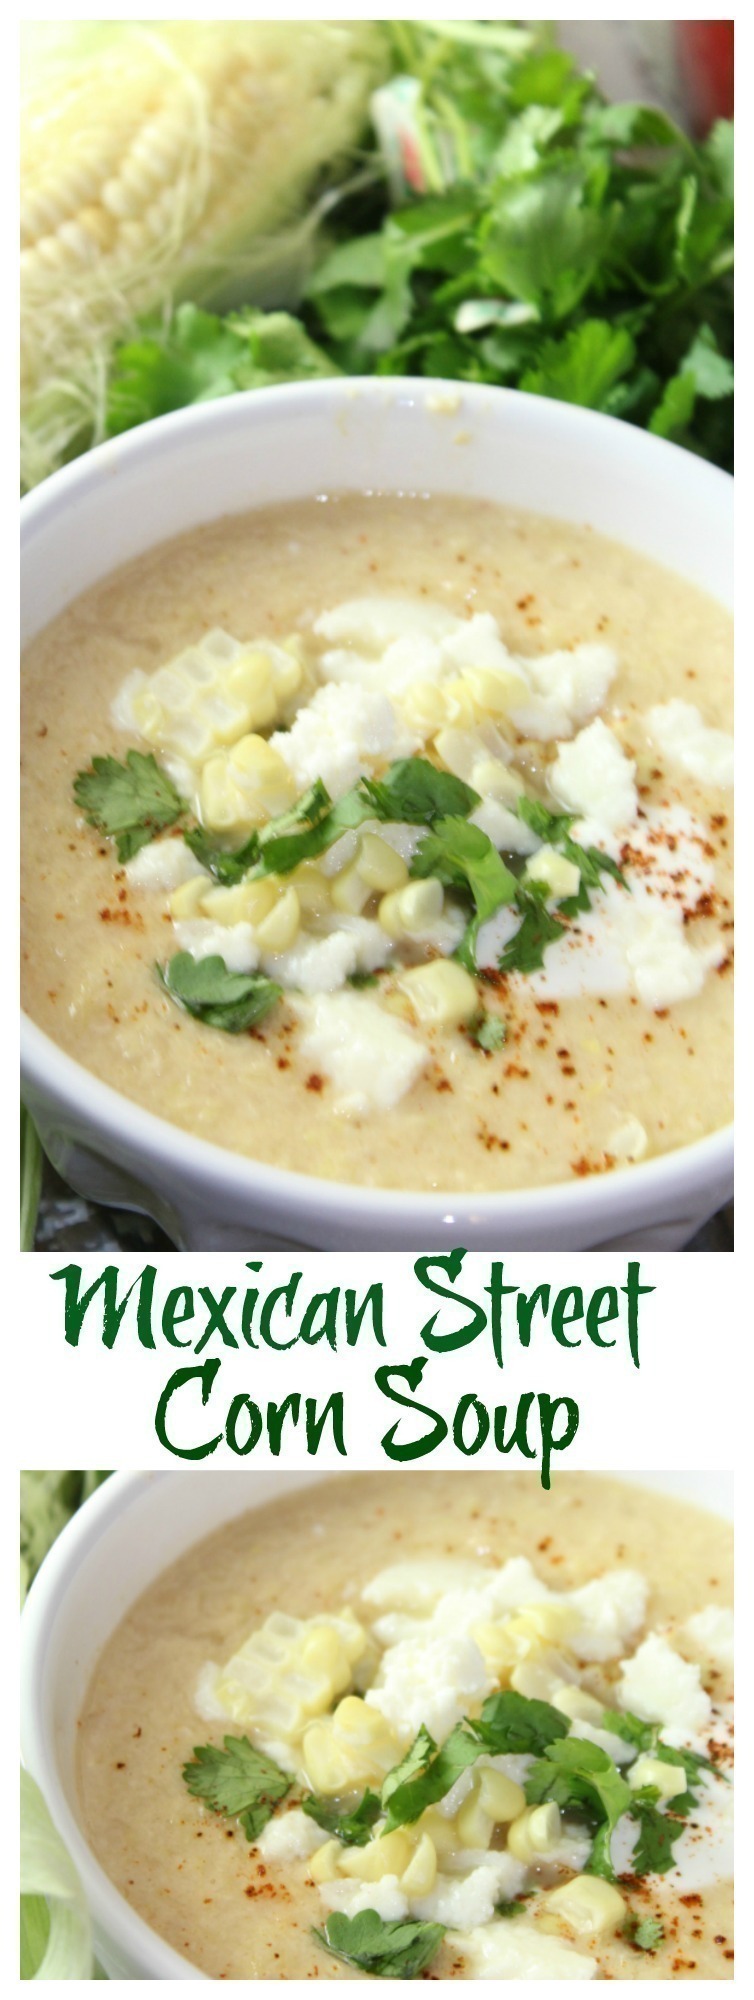 All of your favorite flavors of Mexican street corn wrapped into a deliciously creamy soup.